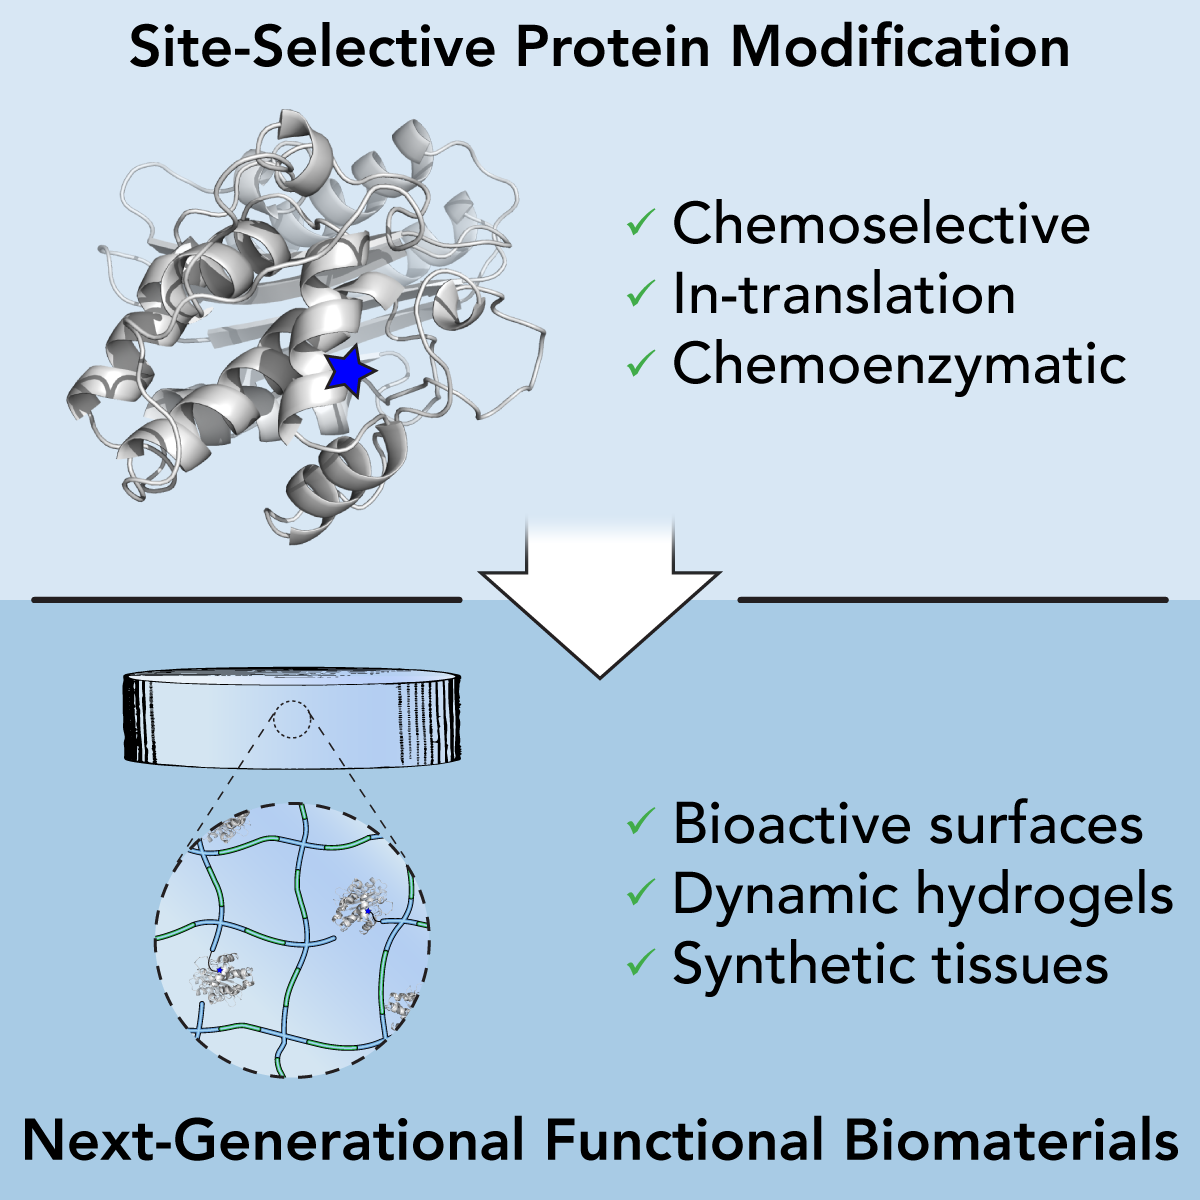 Site-Selective Protein Modification: From Functionalized Proteins to Functional Biomaterials